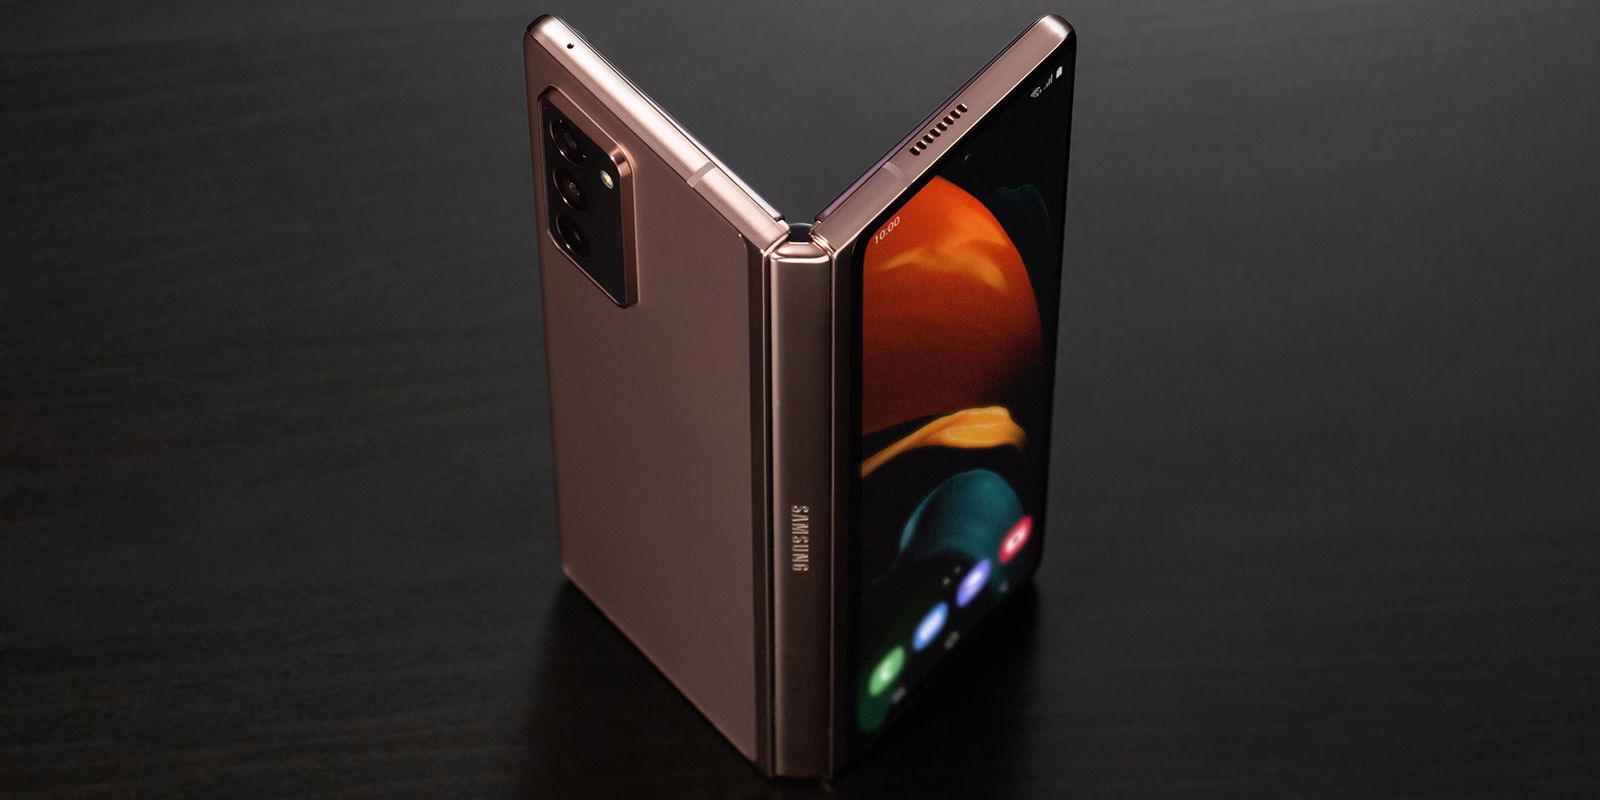 Samsung Galaxy Z Fold 2 standing up on a table